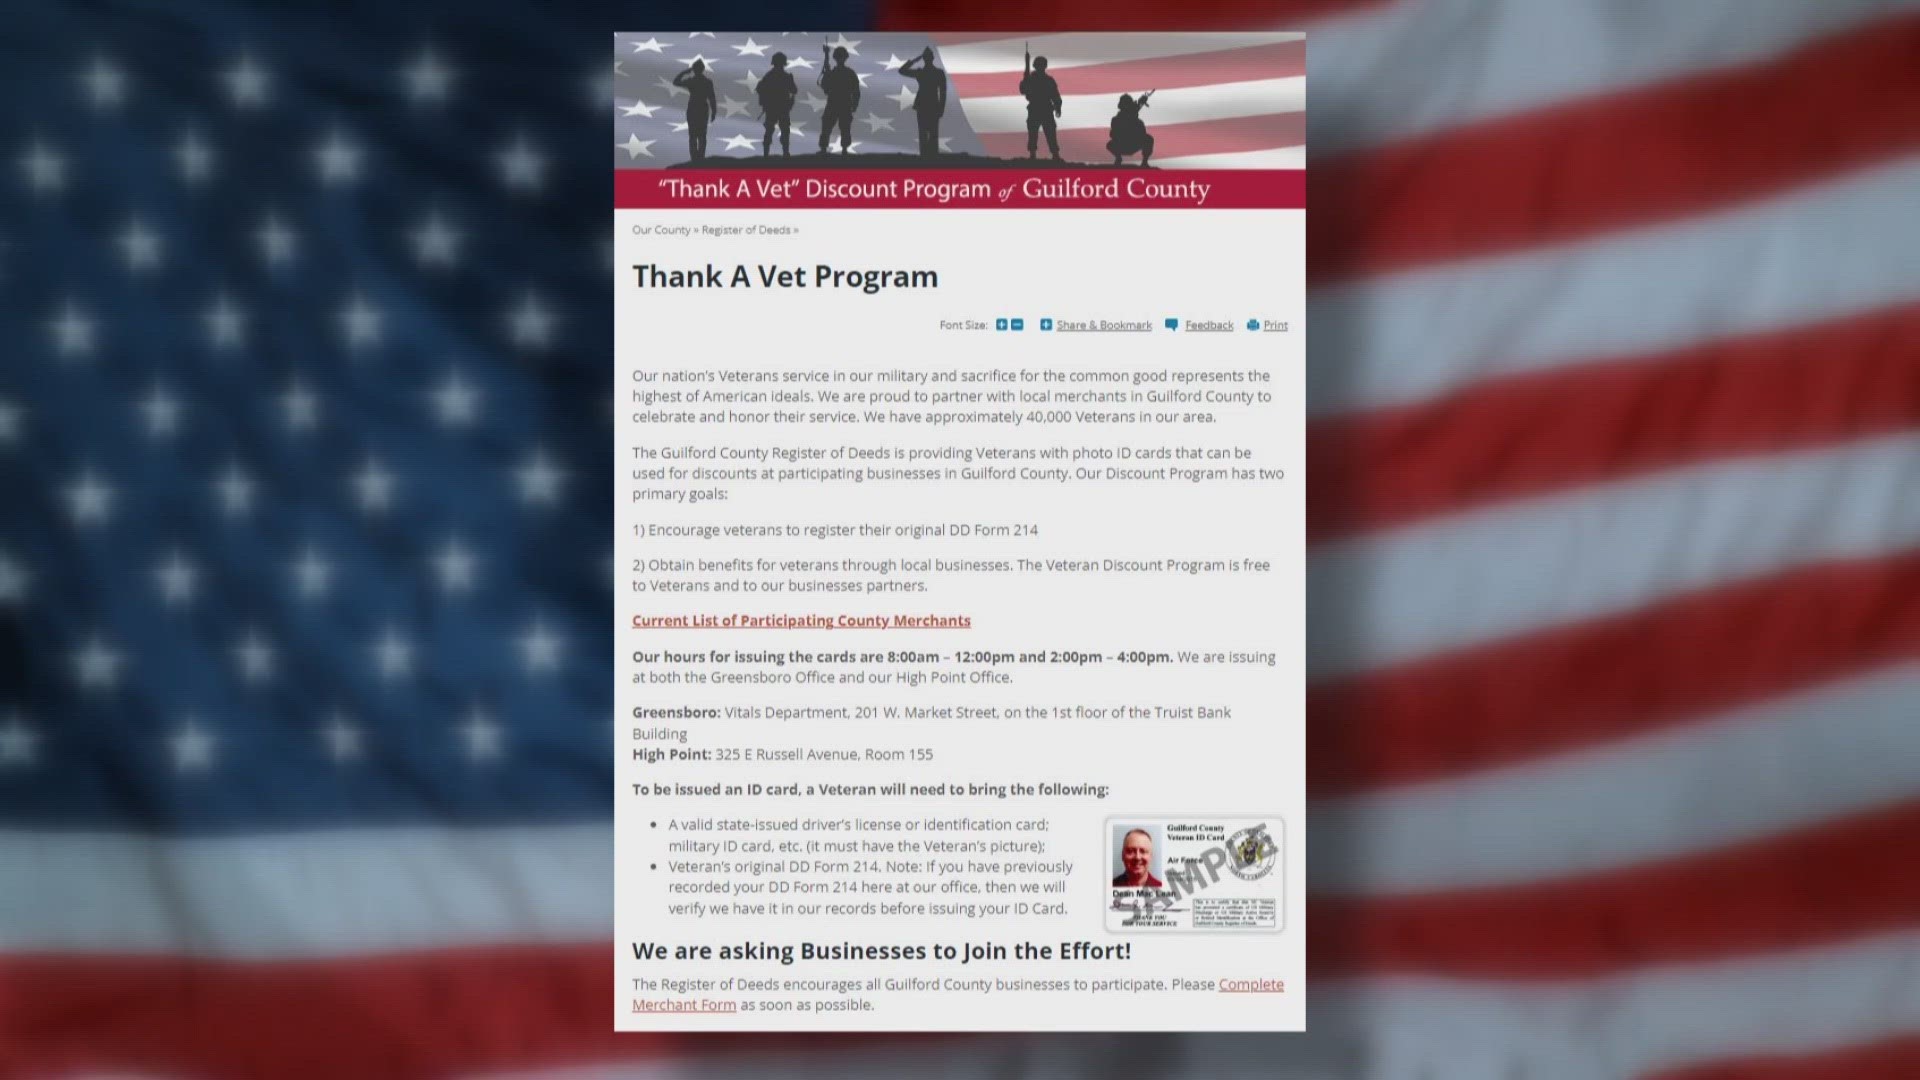 Veterans Day 2022 free meals, discounts and offers - VA News